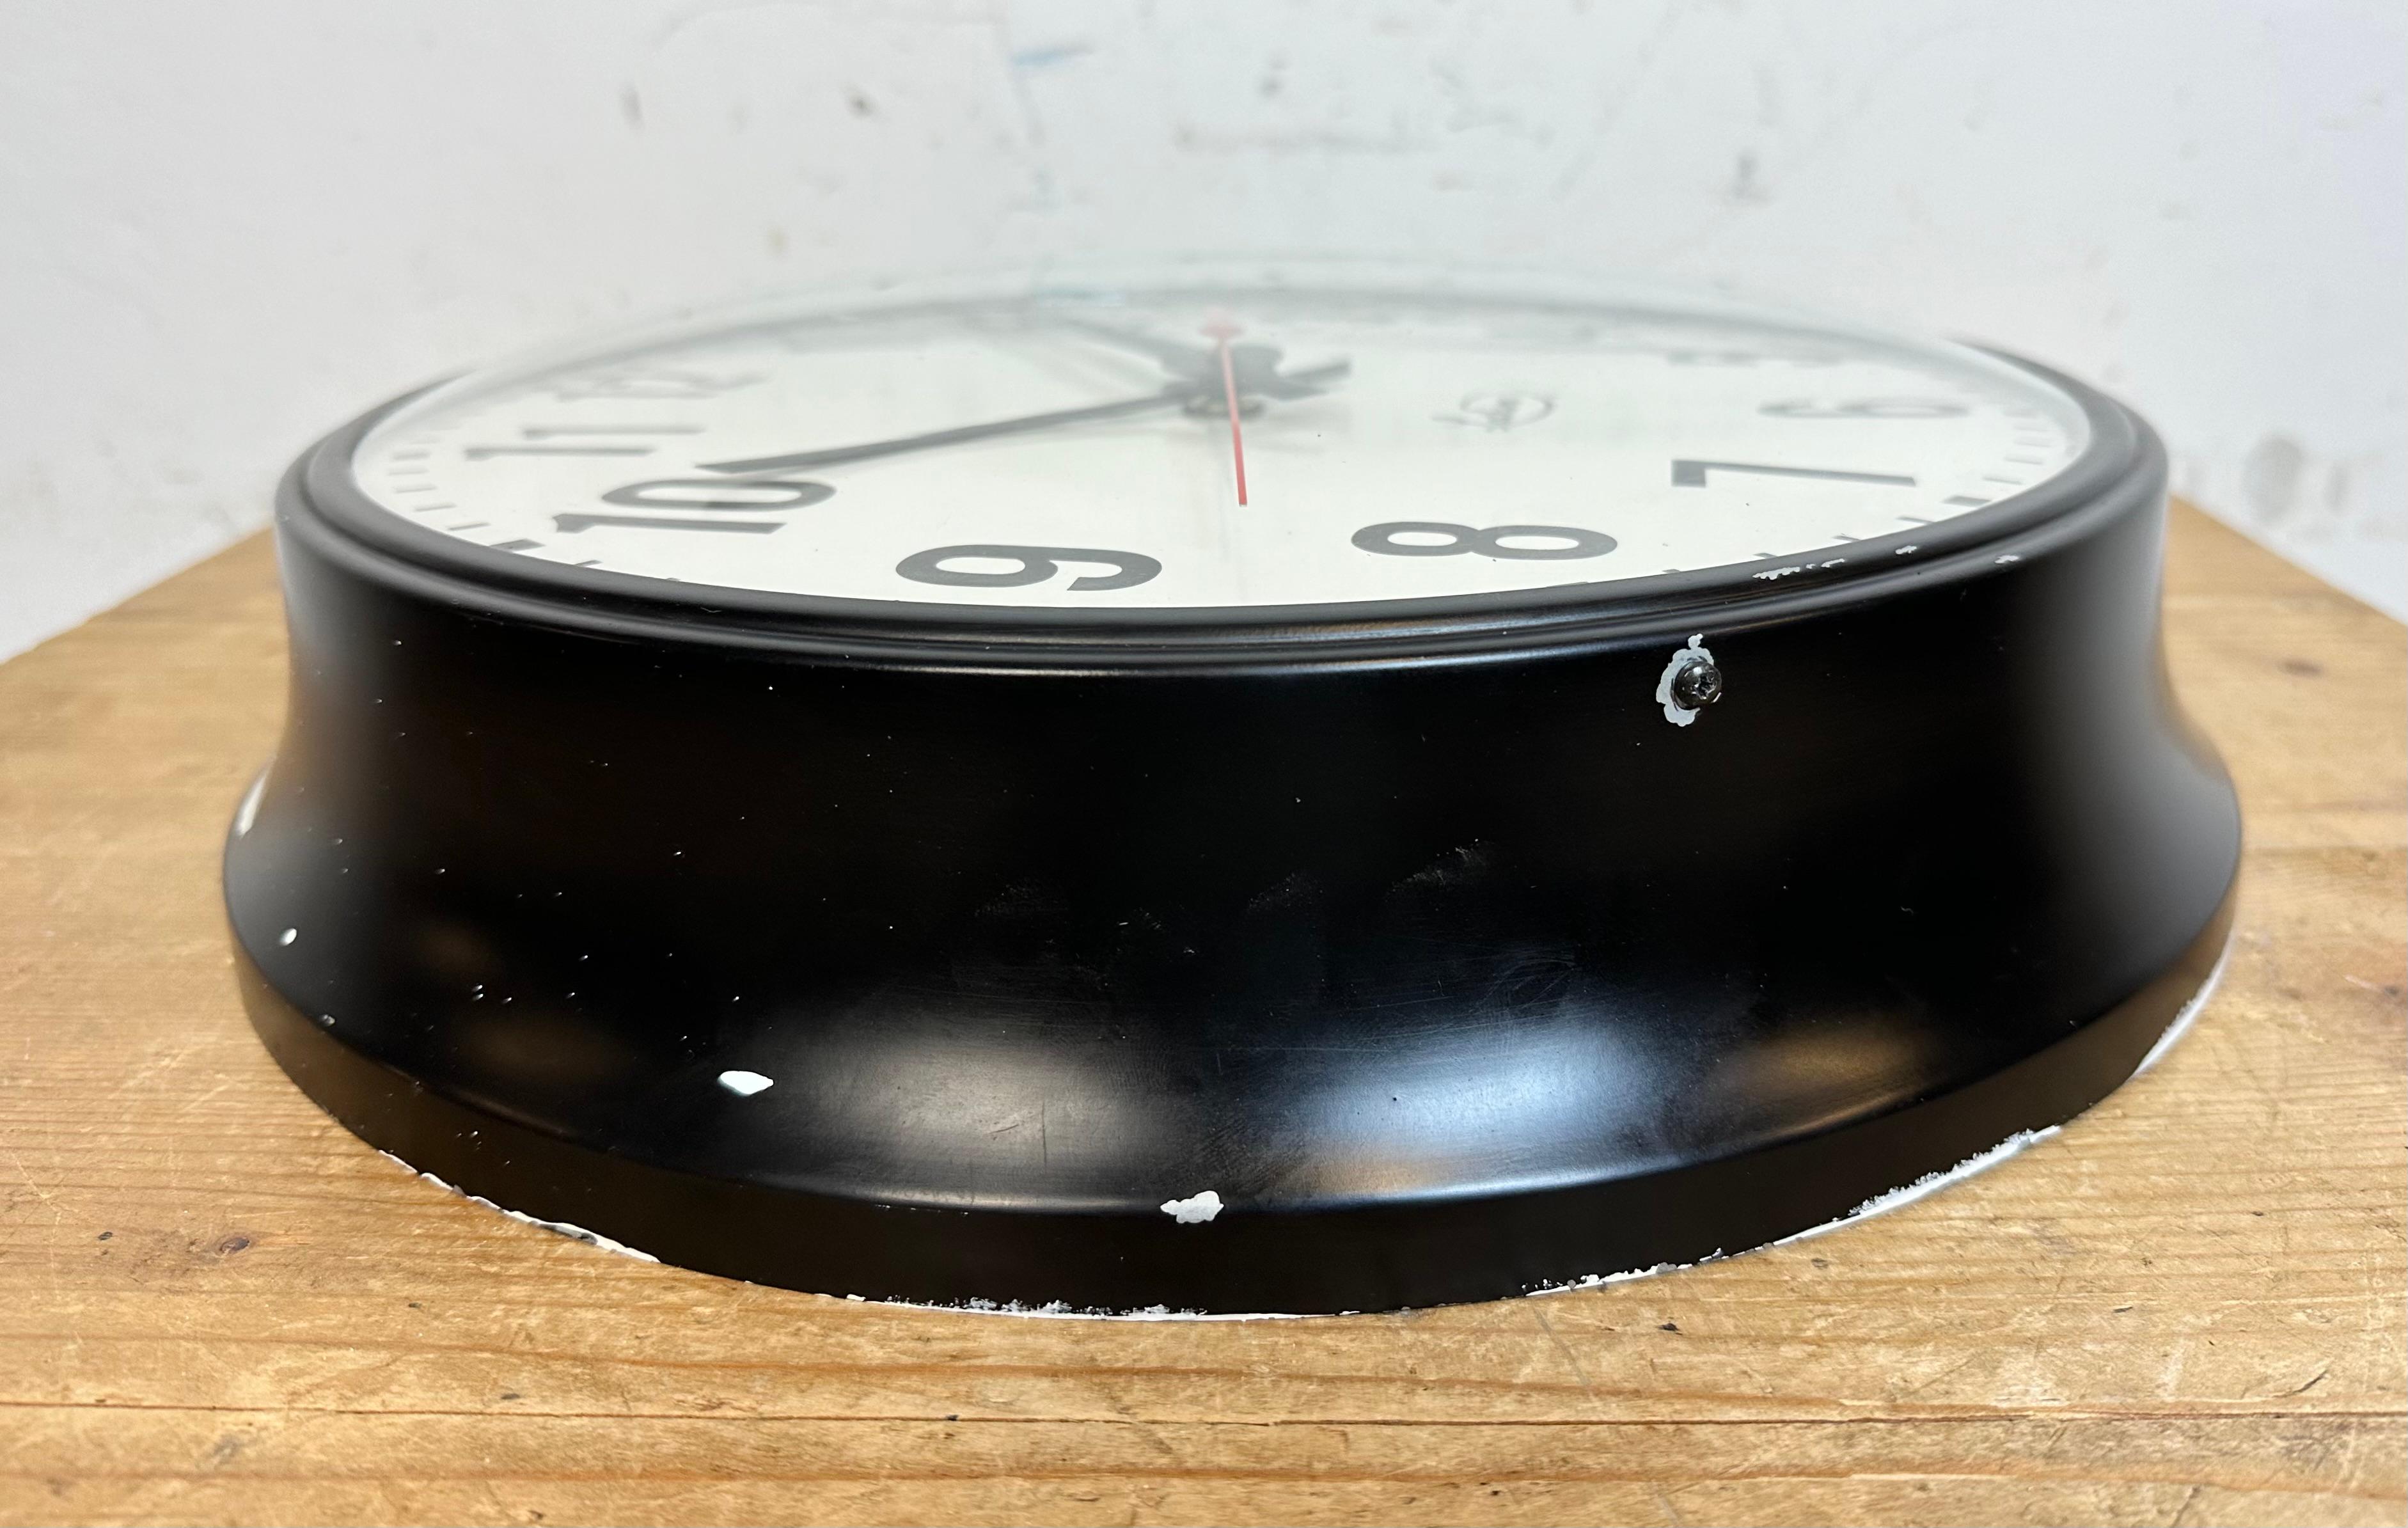 Vintage Black School Wall Clock from Lathem, 1980s For Sale 5